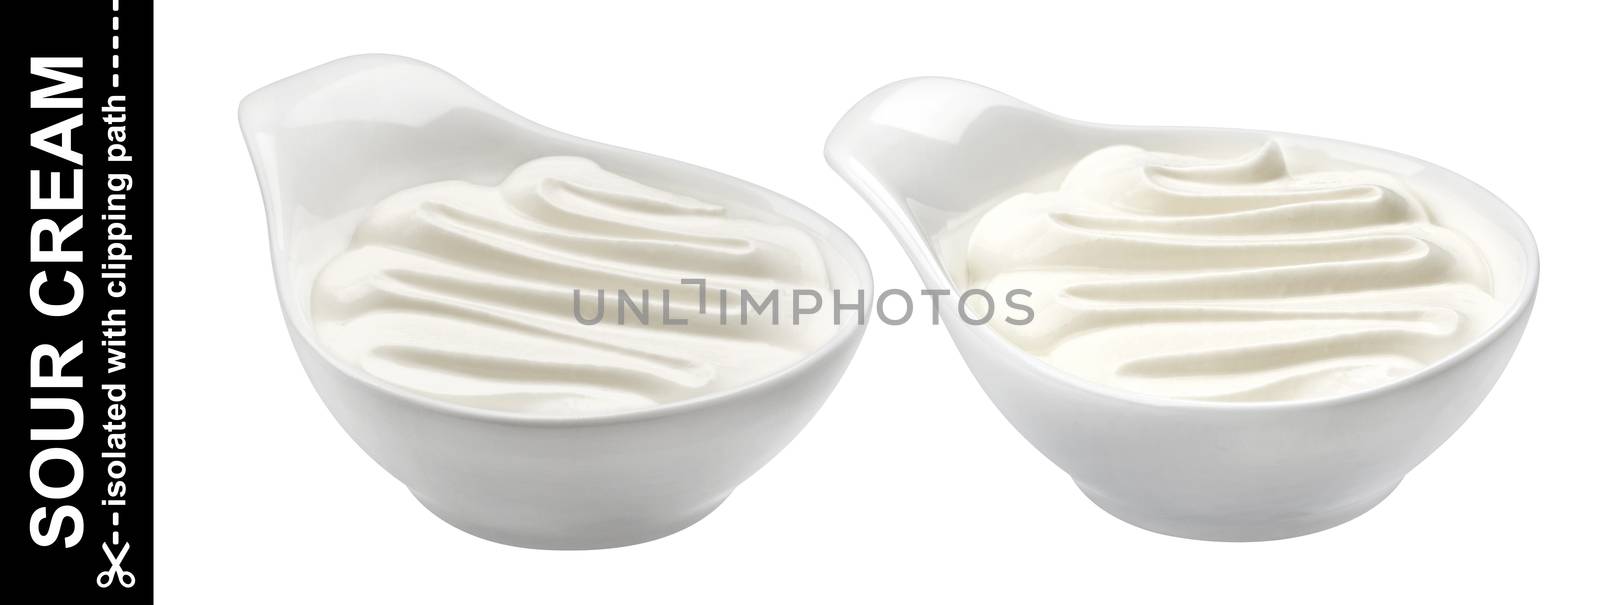 Sour cream isolated on white background with clipping path by xamtiw